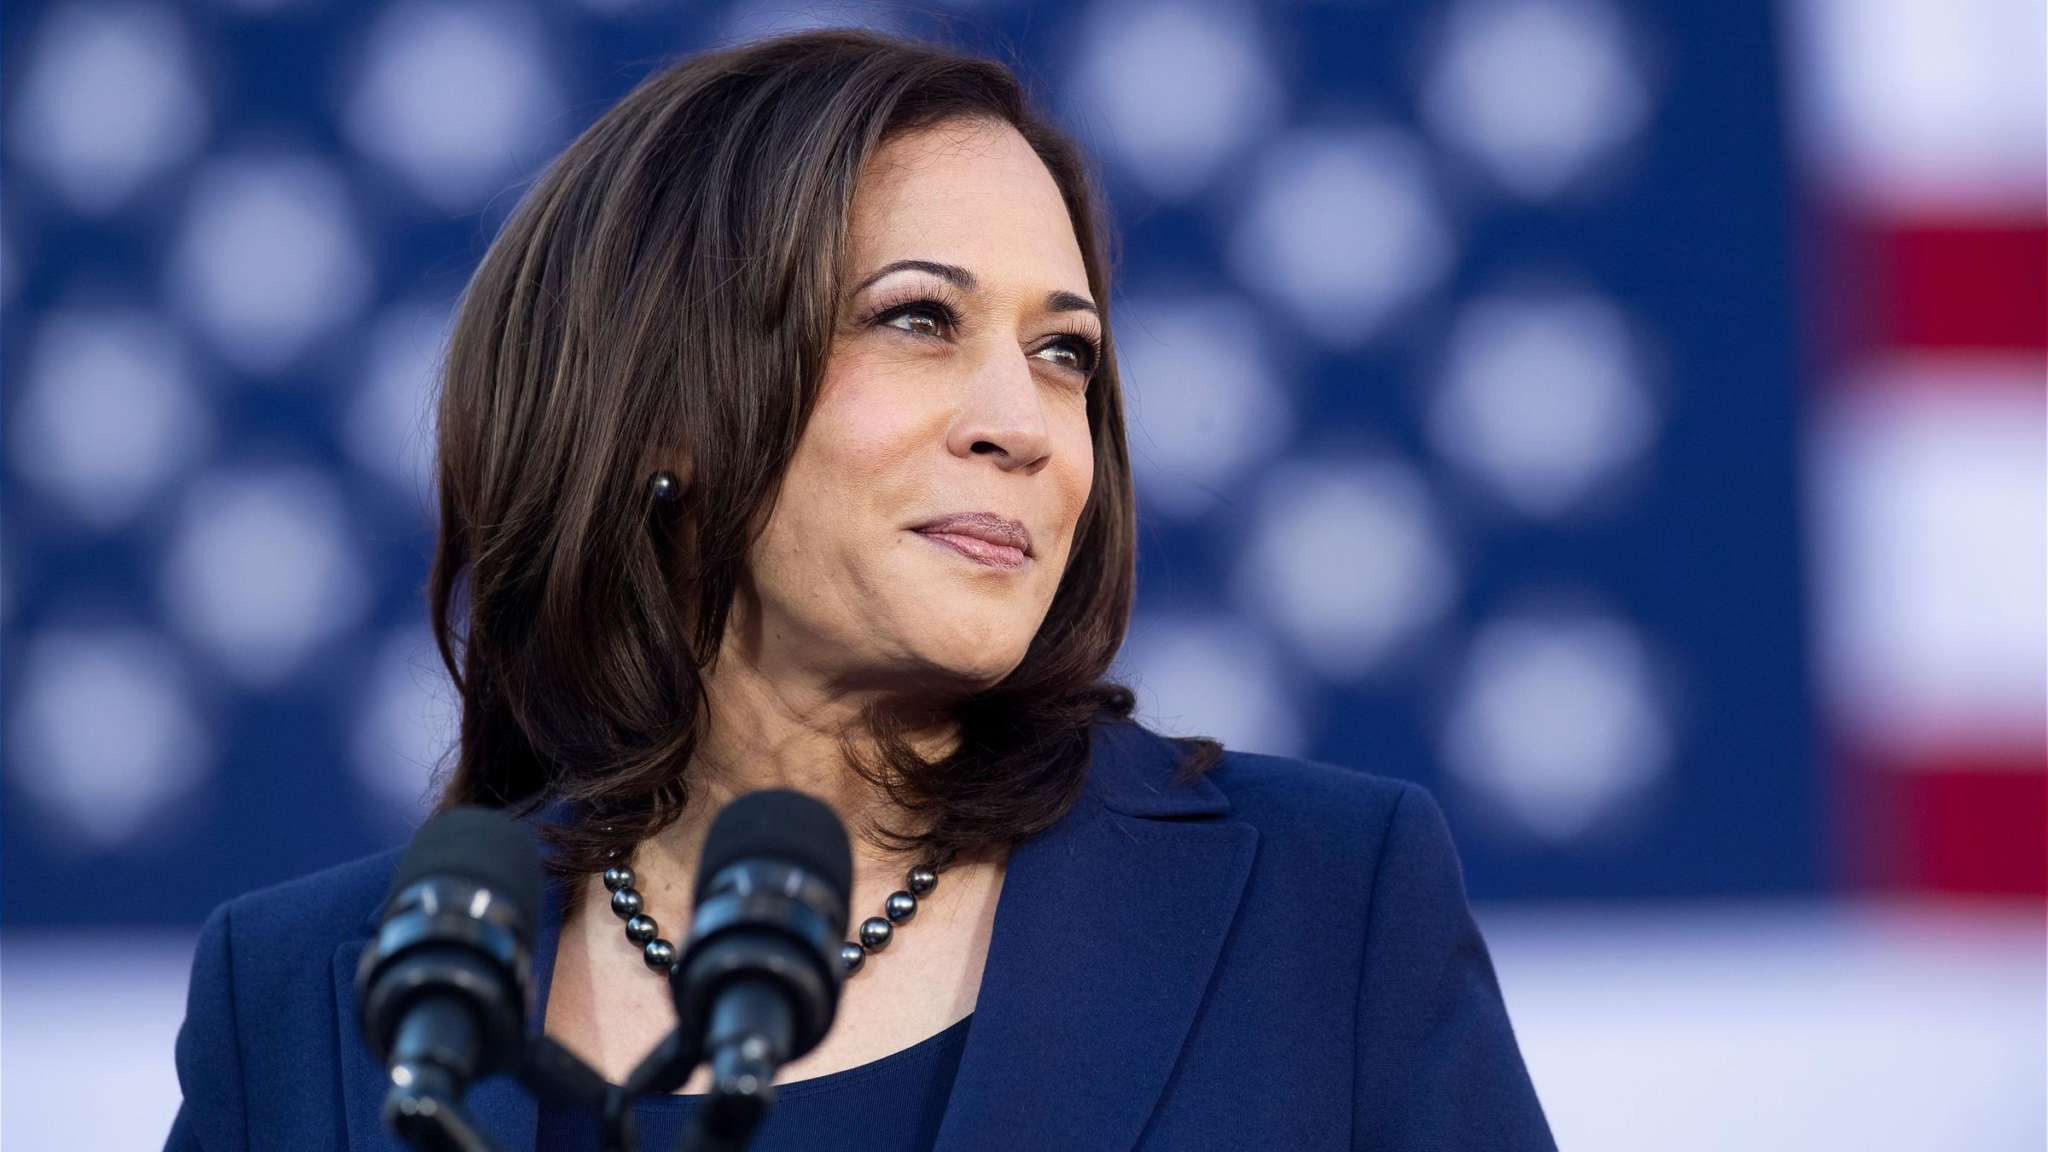 Kamala Harris Sets Some Things Straight About Taxes - Check Out Her Message